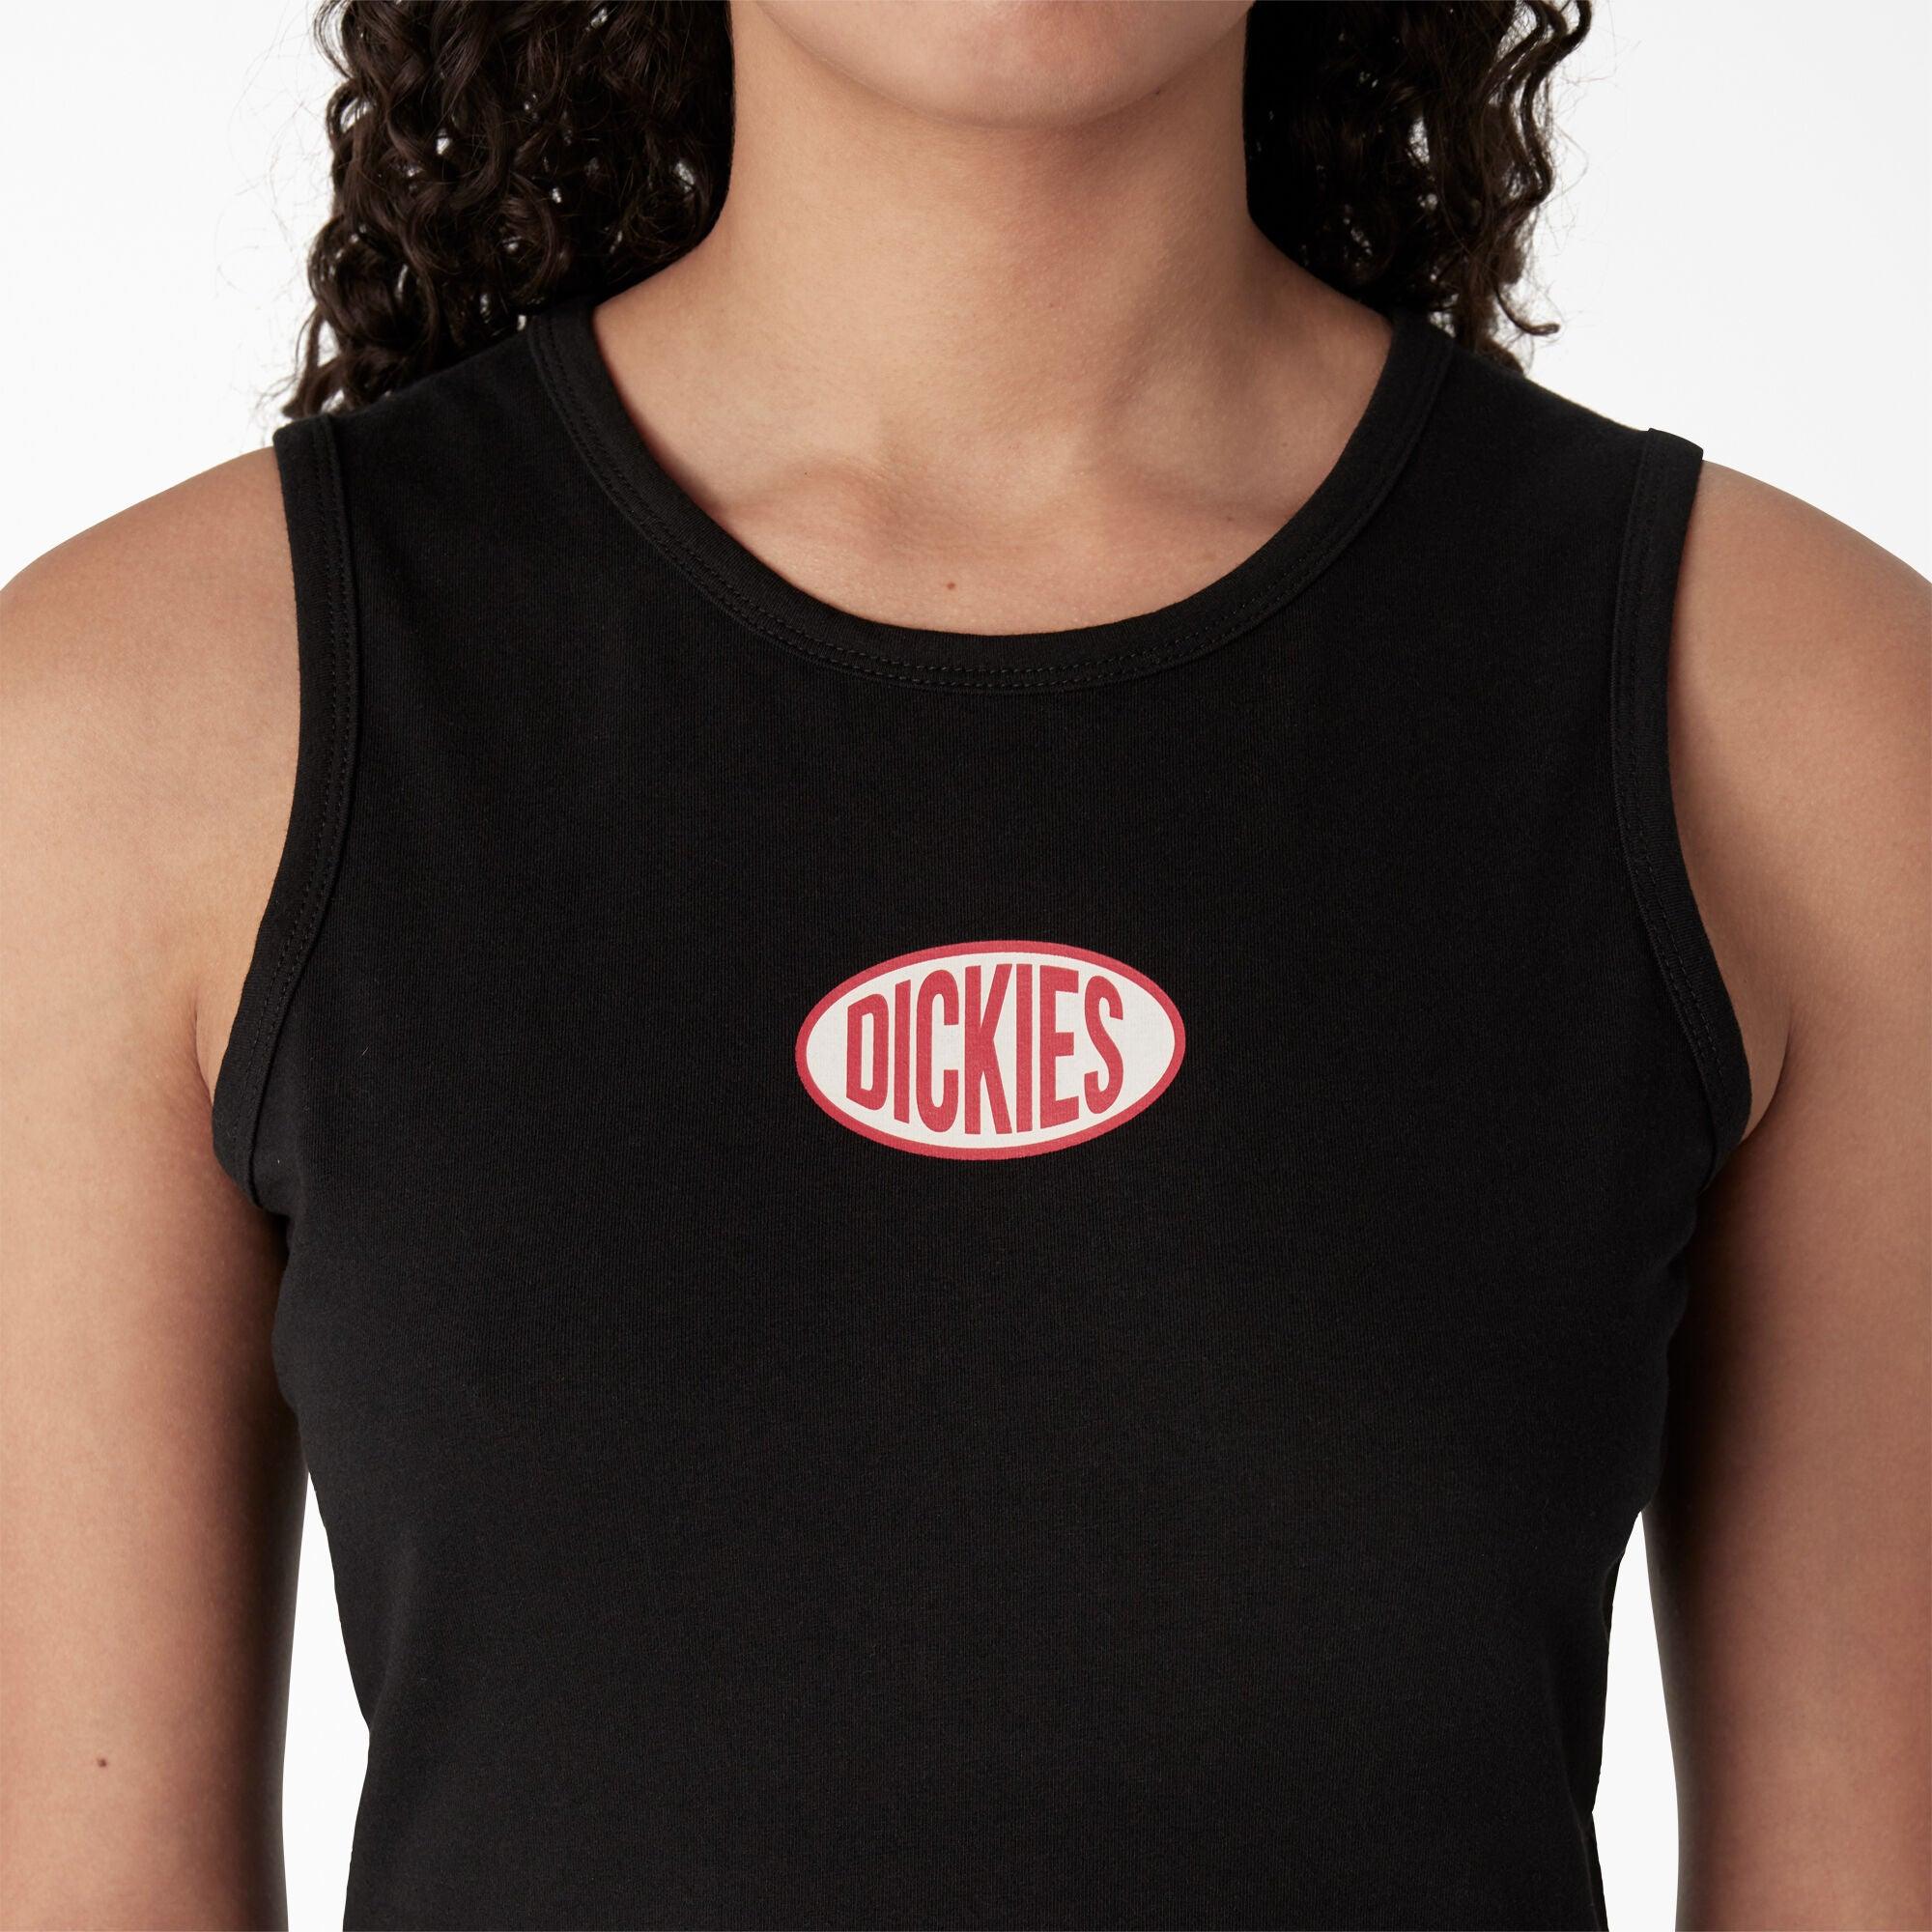 Women's Racerback Cropped Tank Top, Black - Purpose-Built / Home of the Trades